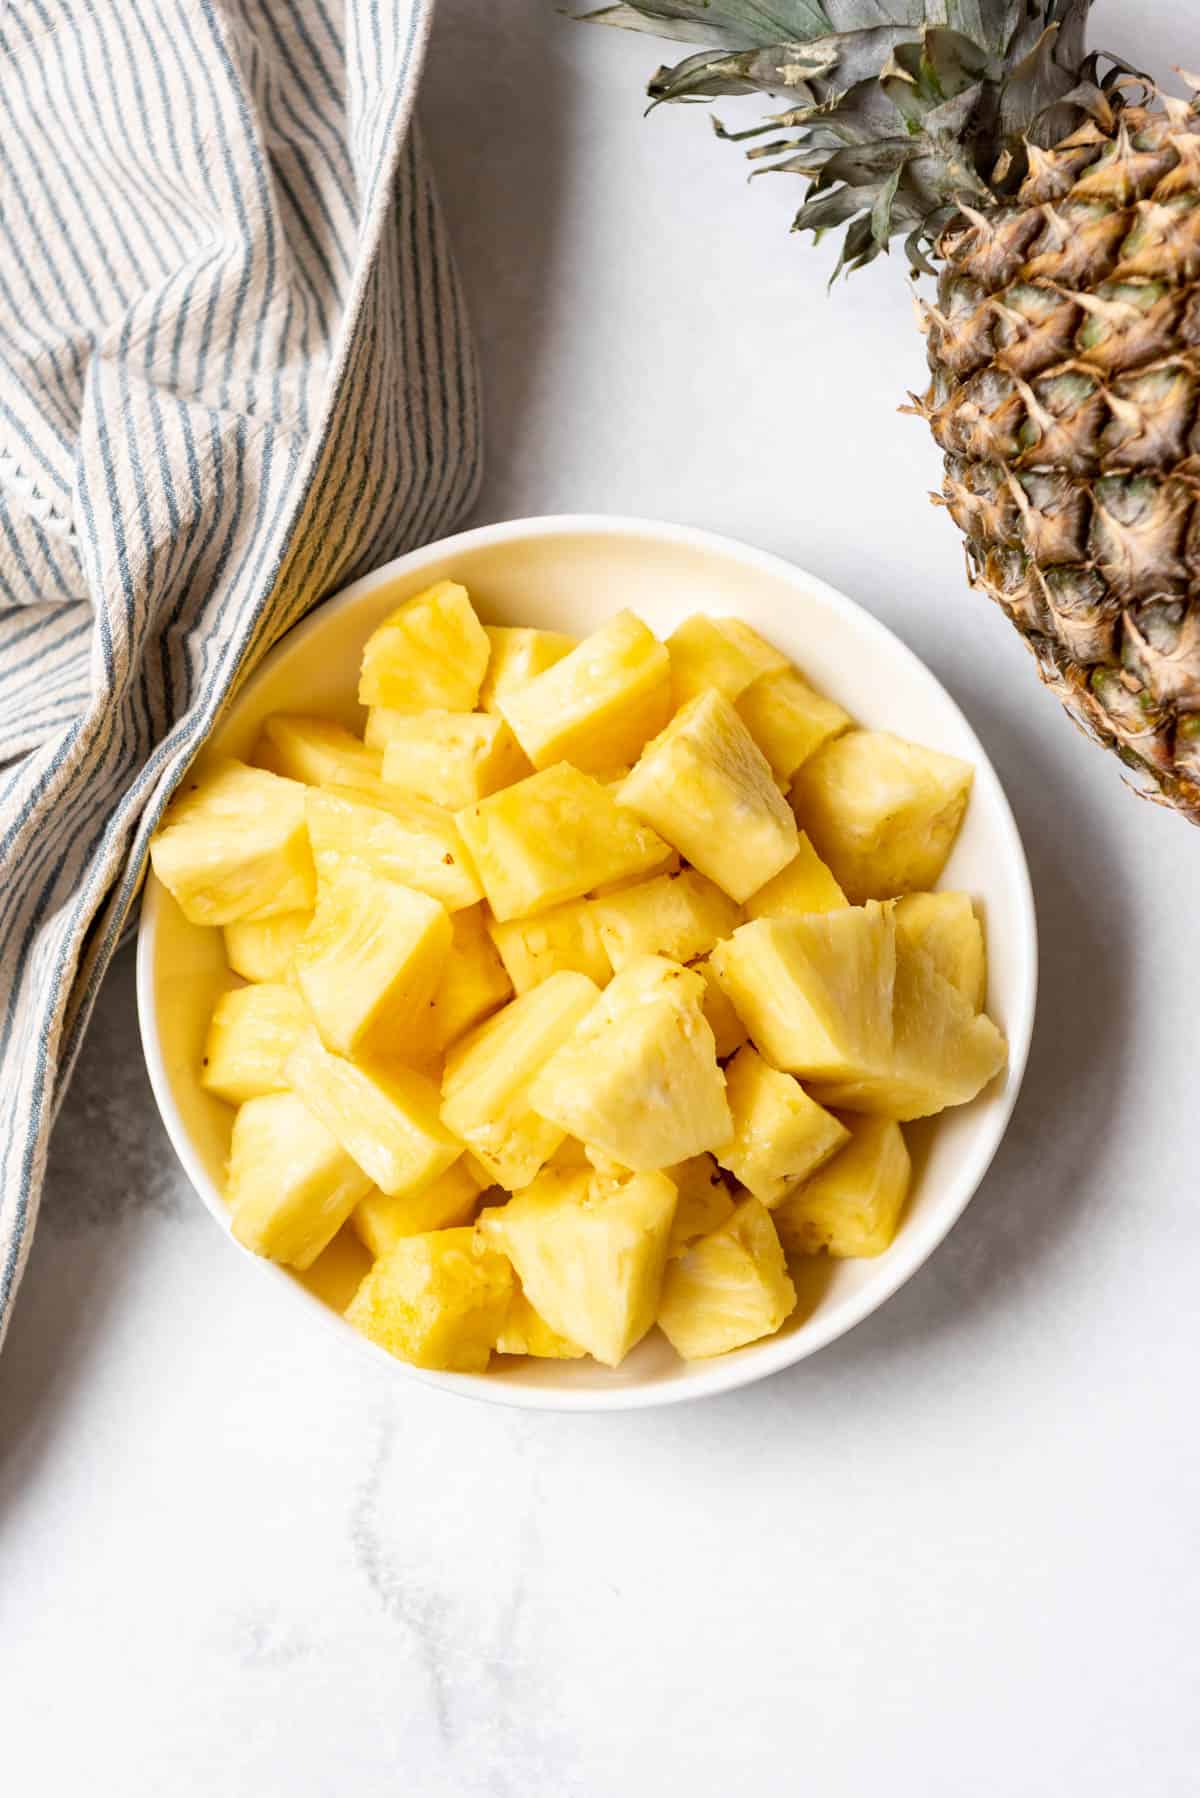 An overhead image of fresh pineapple chunks next to a whole pineapple and striped cloth.